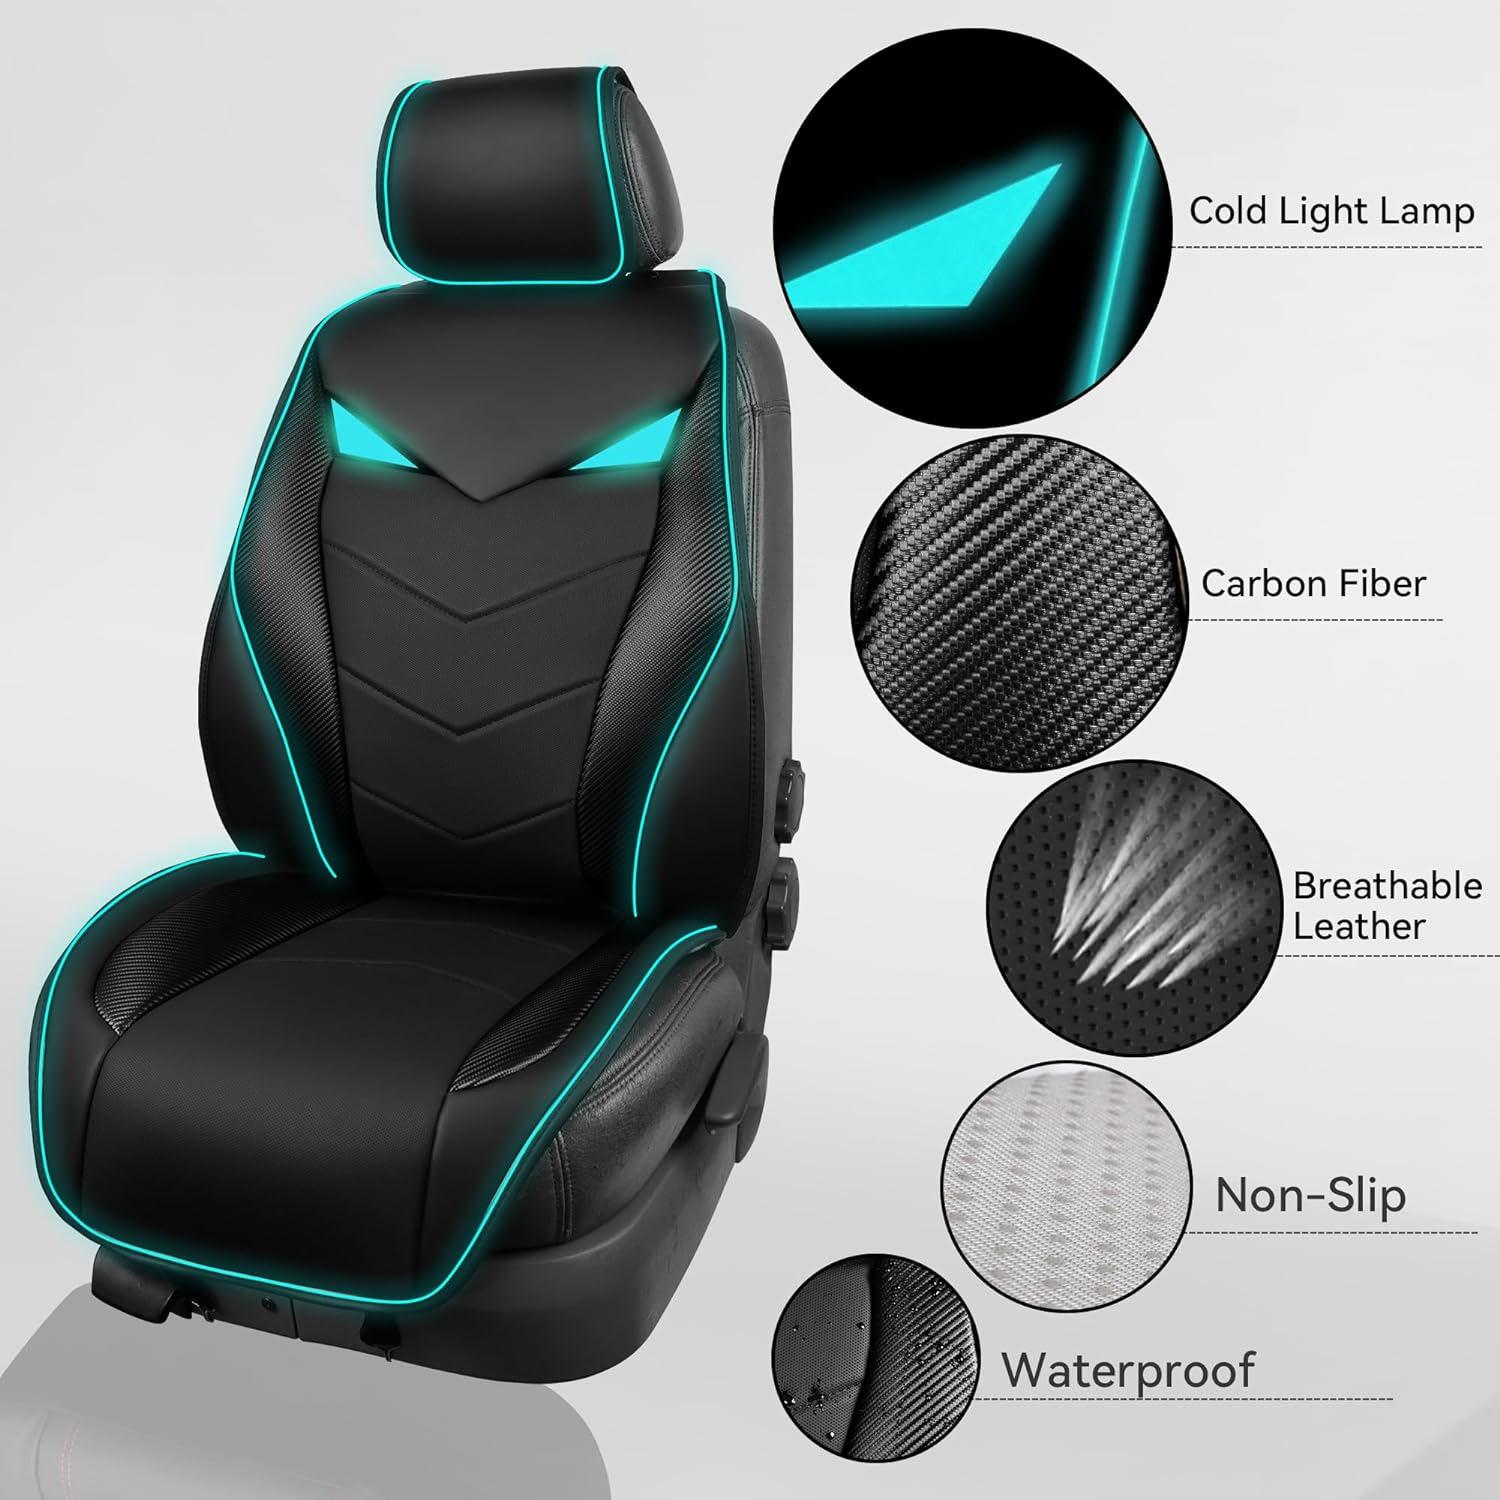 CAR PASS Leather Two Front Seat Covers with Led Light,Sound-Activated Music Sync Little Monster Eye Lighting Front Seat Cover Only Universal Fit for Sedans SUVs Vans,Airbag Compatiable(Black and Mint)